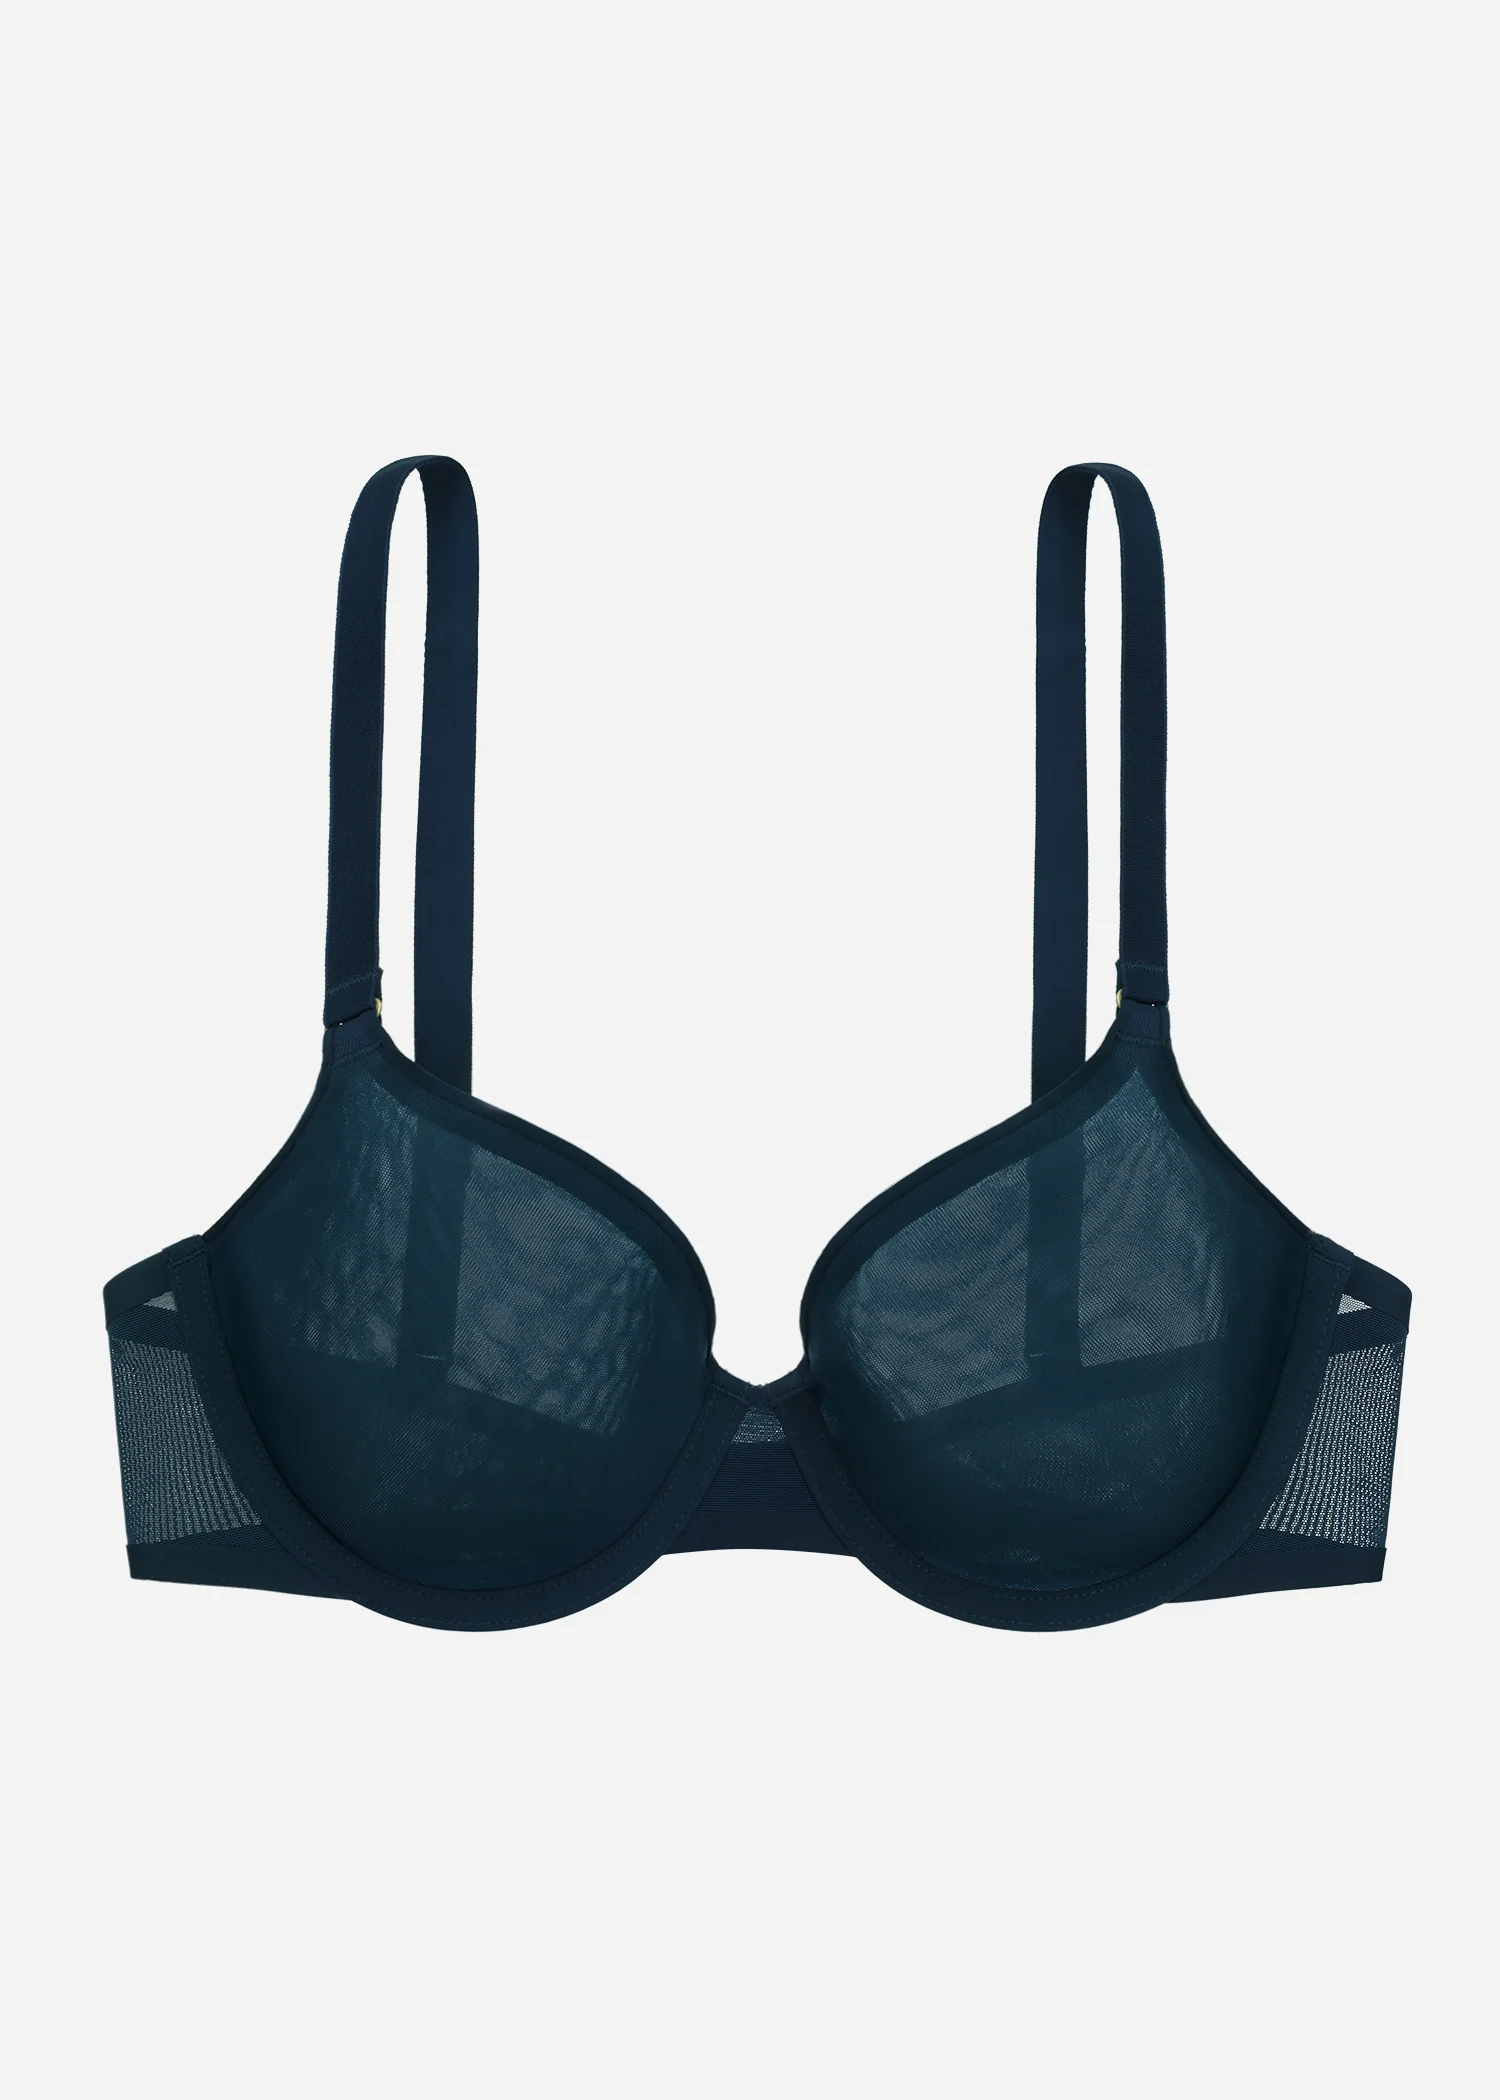 CUUP: The Innovative New Bra Company That Promises to Make You Look Great  in Every Size